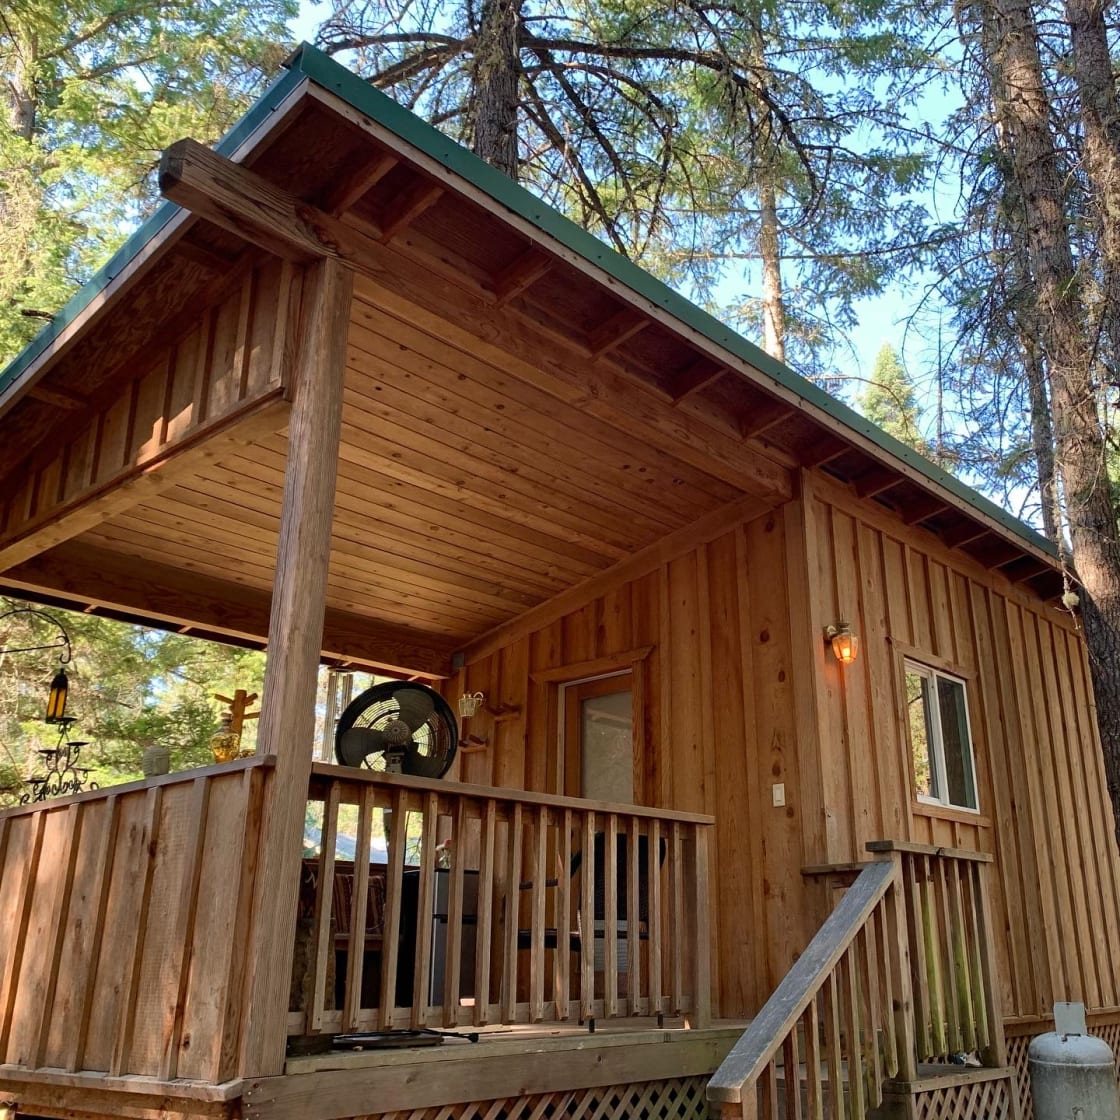 Tiny cabins are so adorable 🥰 